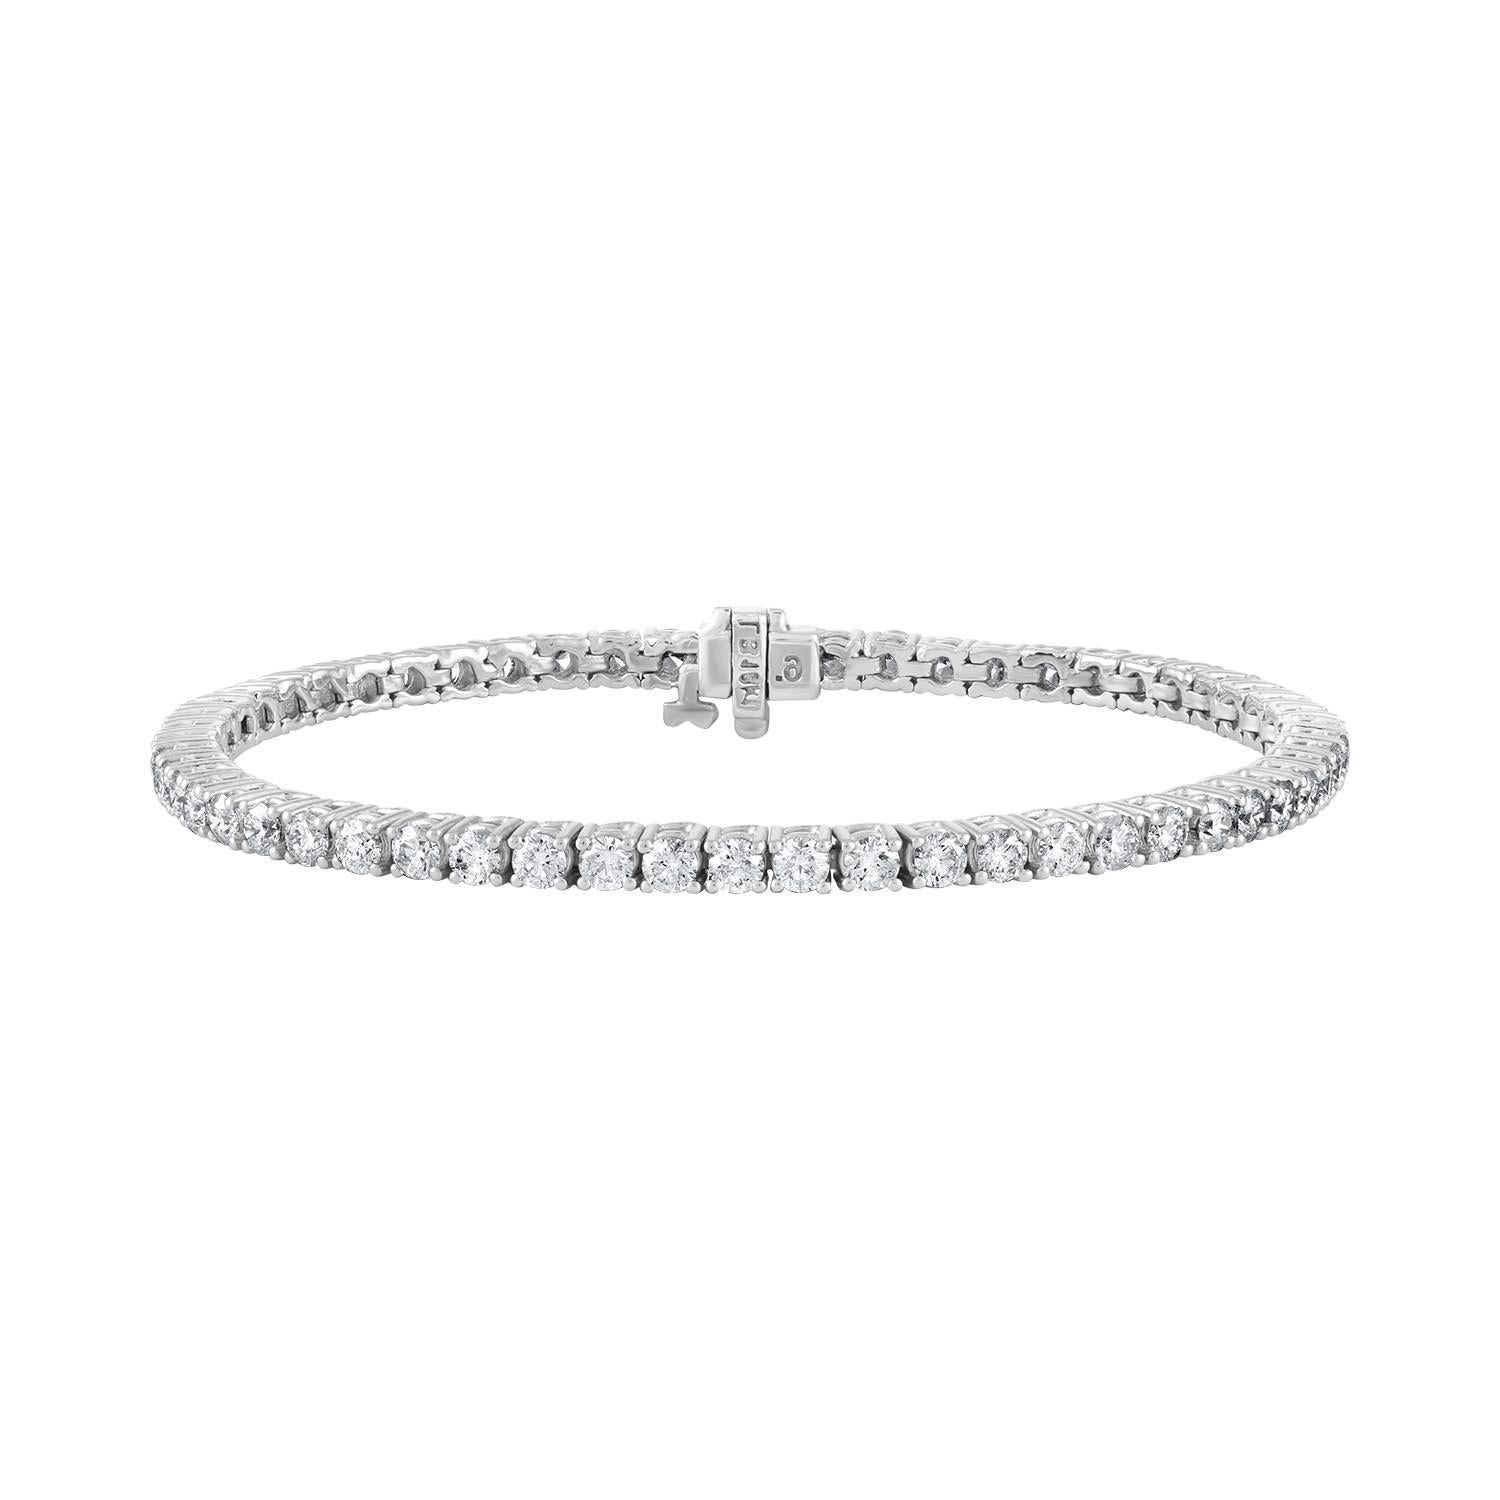 Custom 14kt white gold tennis bracelet 2.00 cts of round diamonds in a 4 prong setting 96 stones  0.02 stone FG color SI clarity. Excellent Cut.
